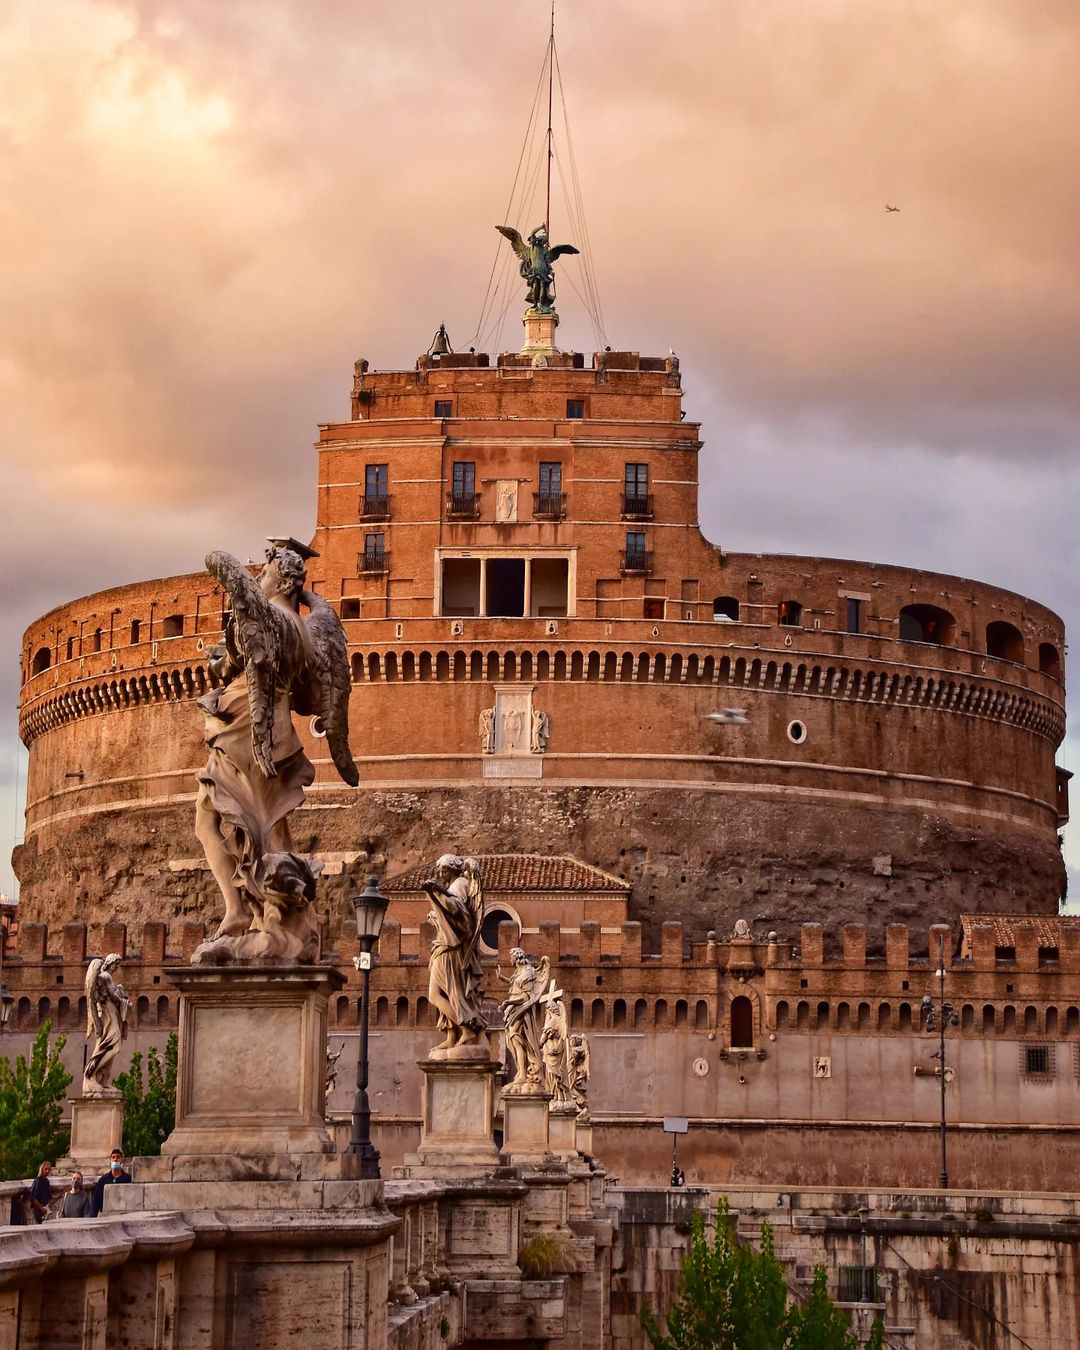 What to see in Rome